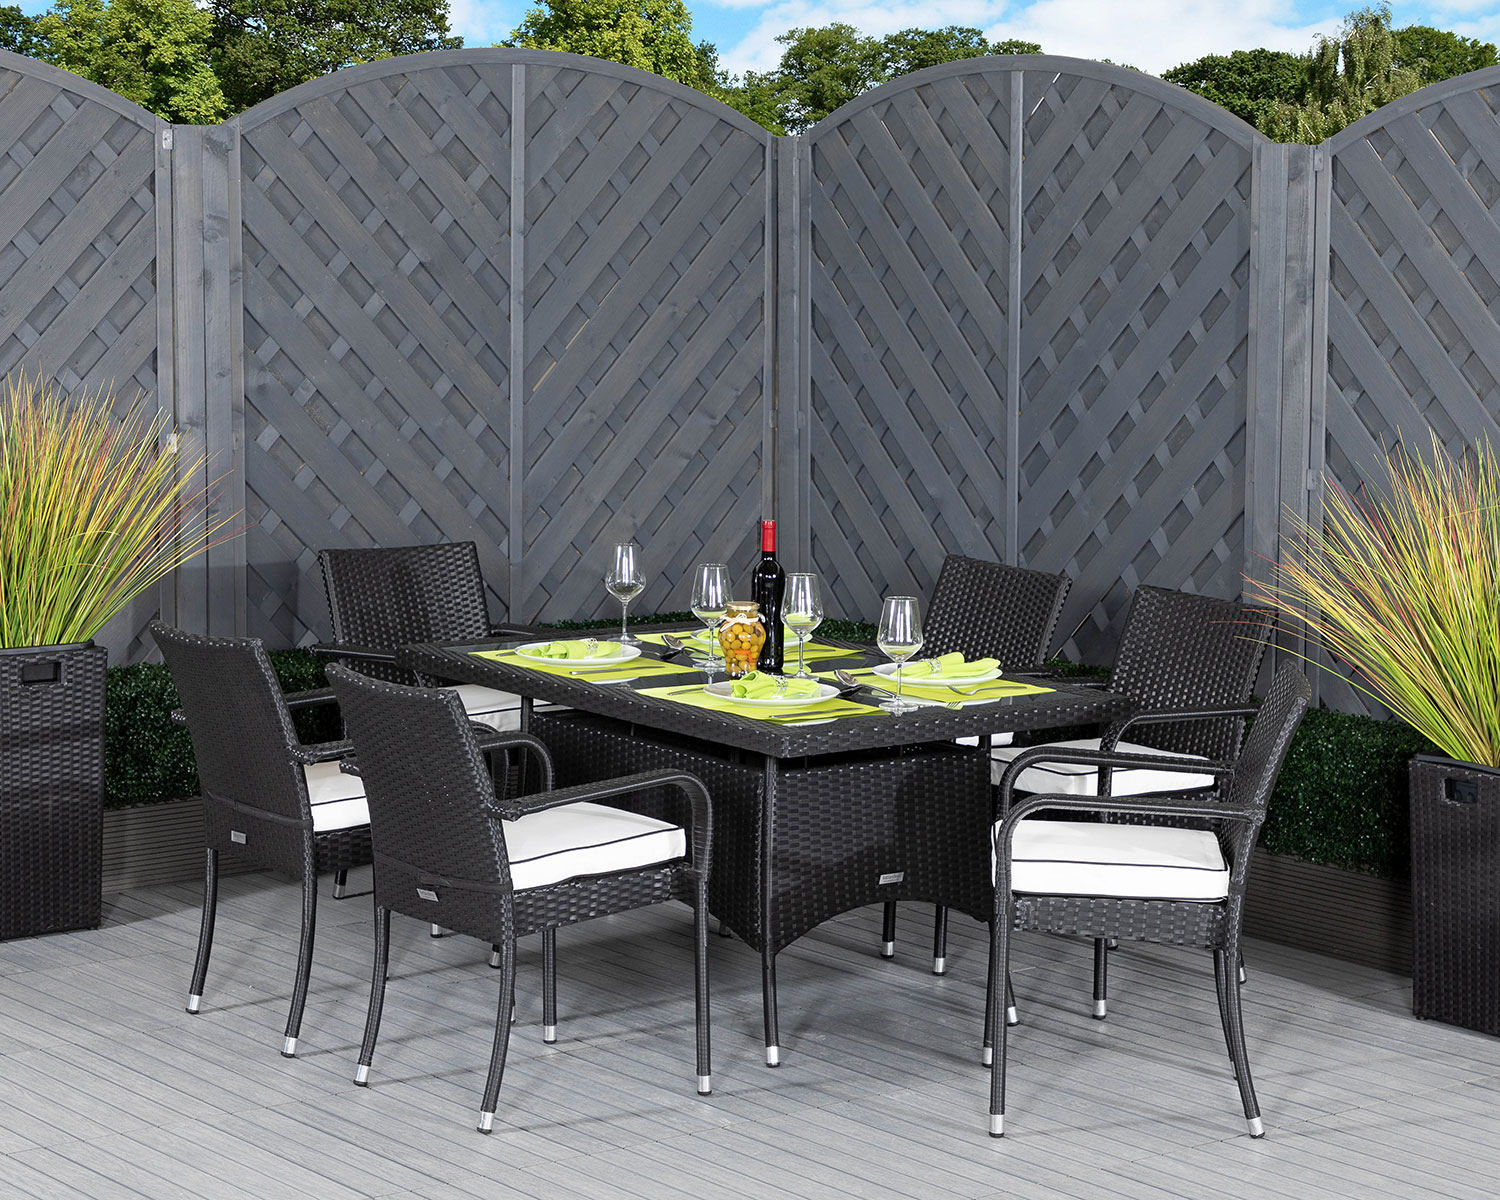 6 Seat Rattan Garden Dining Set With Small Rectangular Dining Table in